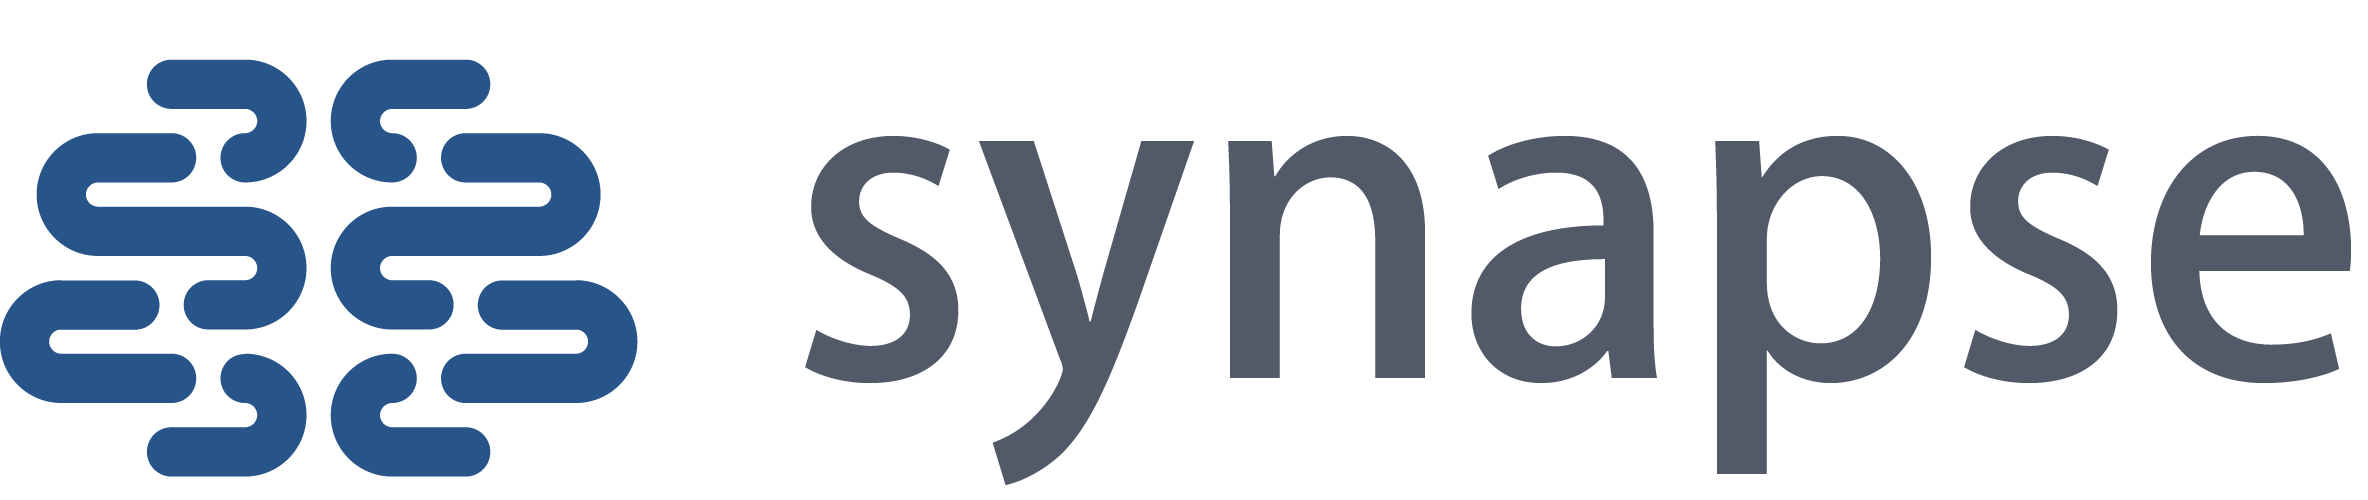 Synapse Logo for Analytics, AFDD, and Optimization